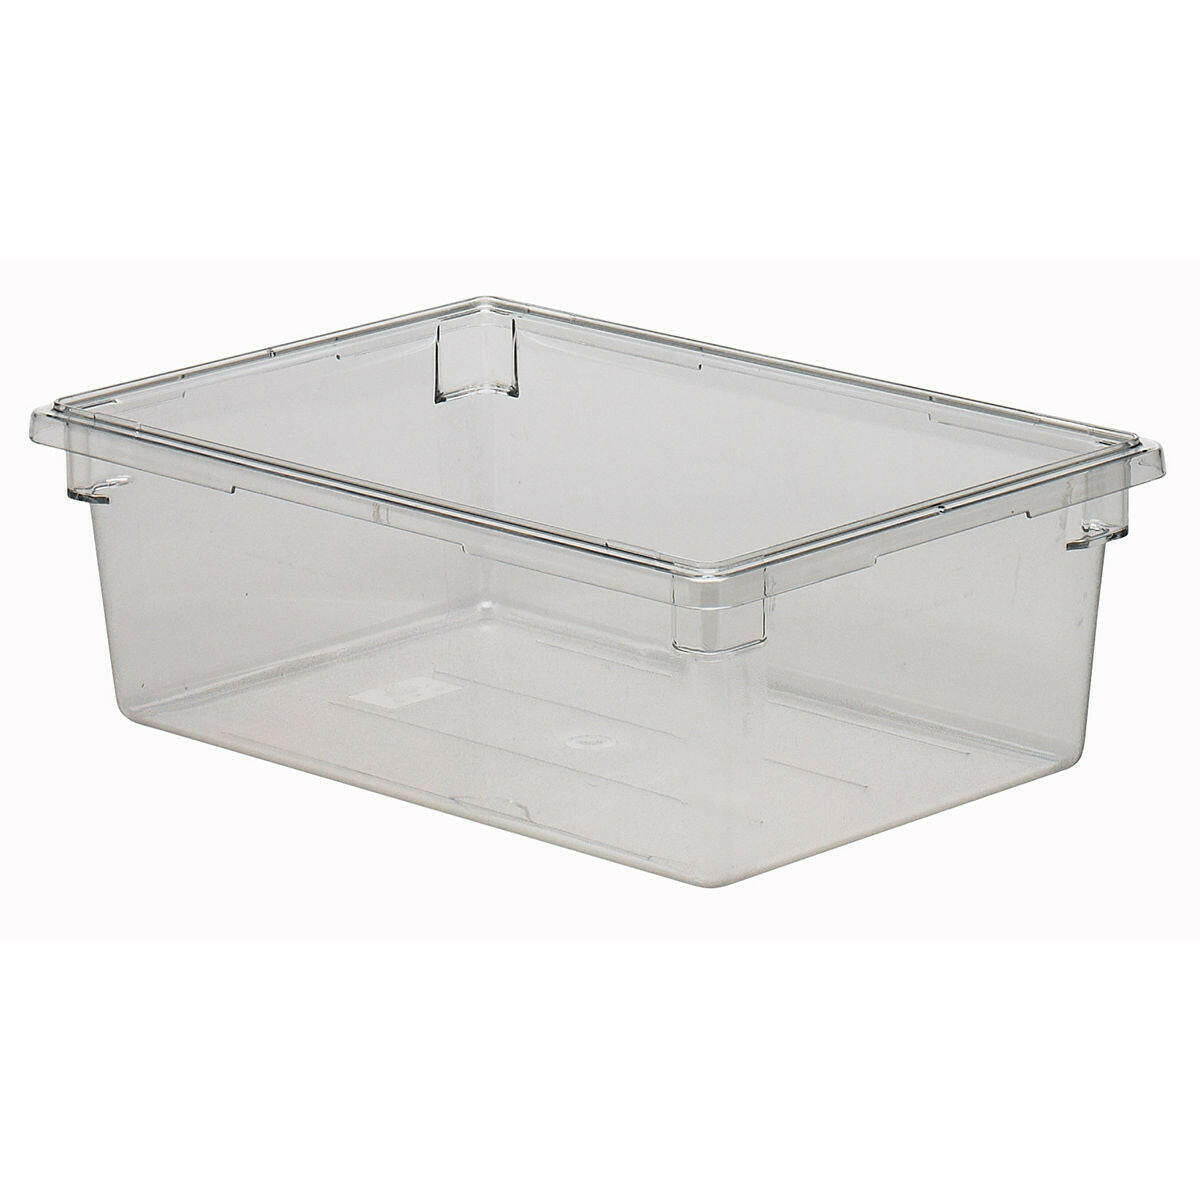 Cambro 10CWC135 Camwear 1/1 Gastronorm Polycarbonate Flat Lid